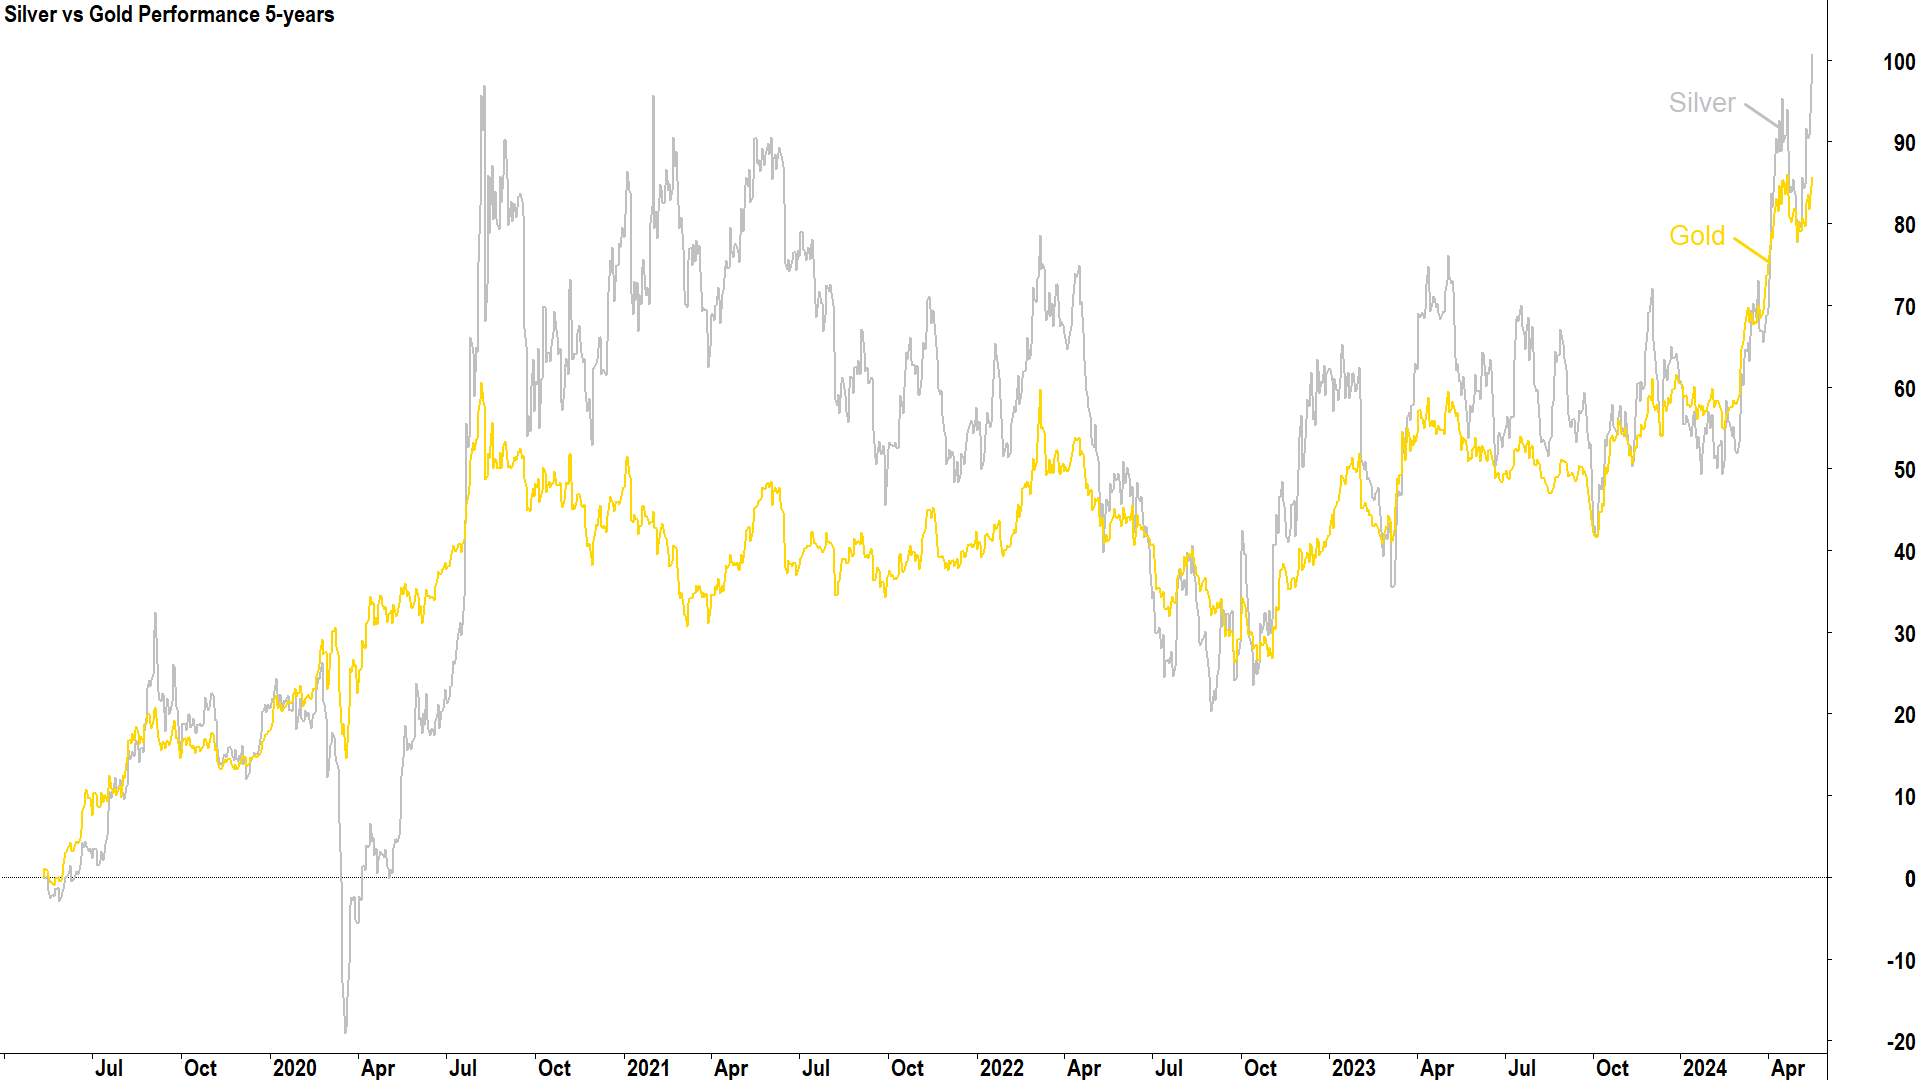 Silver has outperformed gold over the past 5 years. Source: Norgate Data.